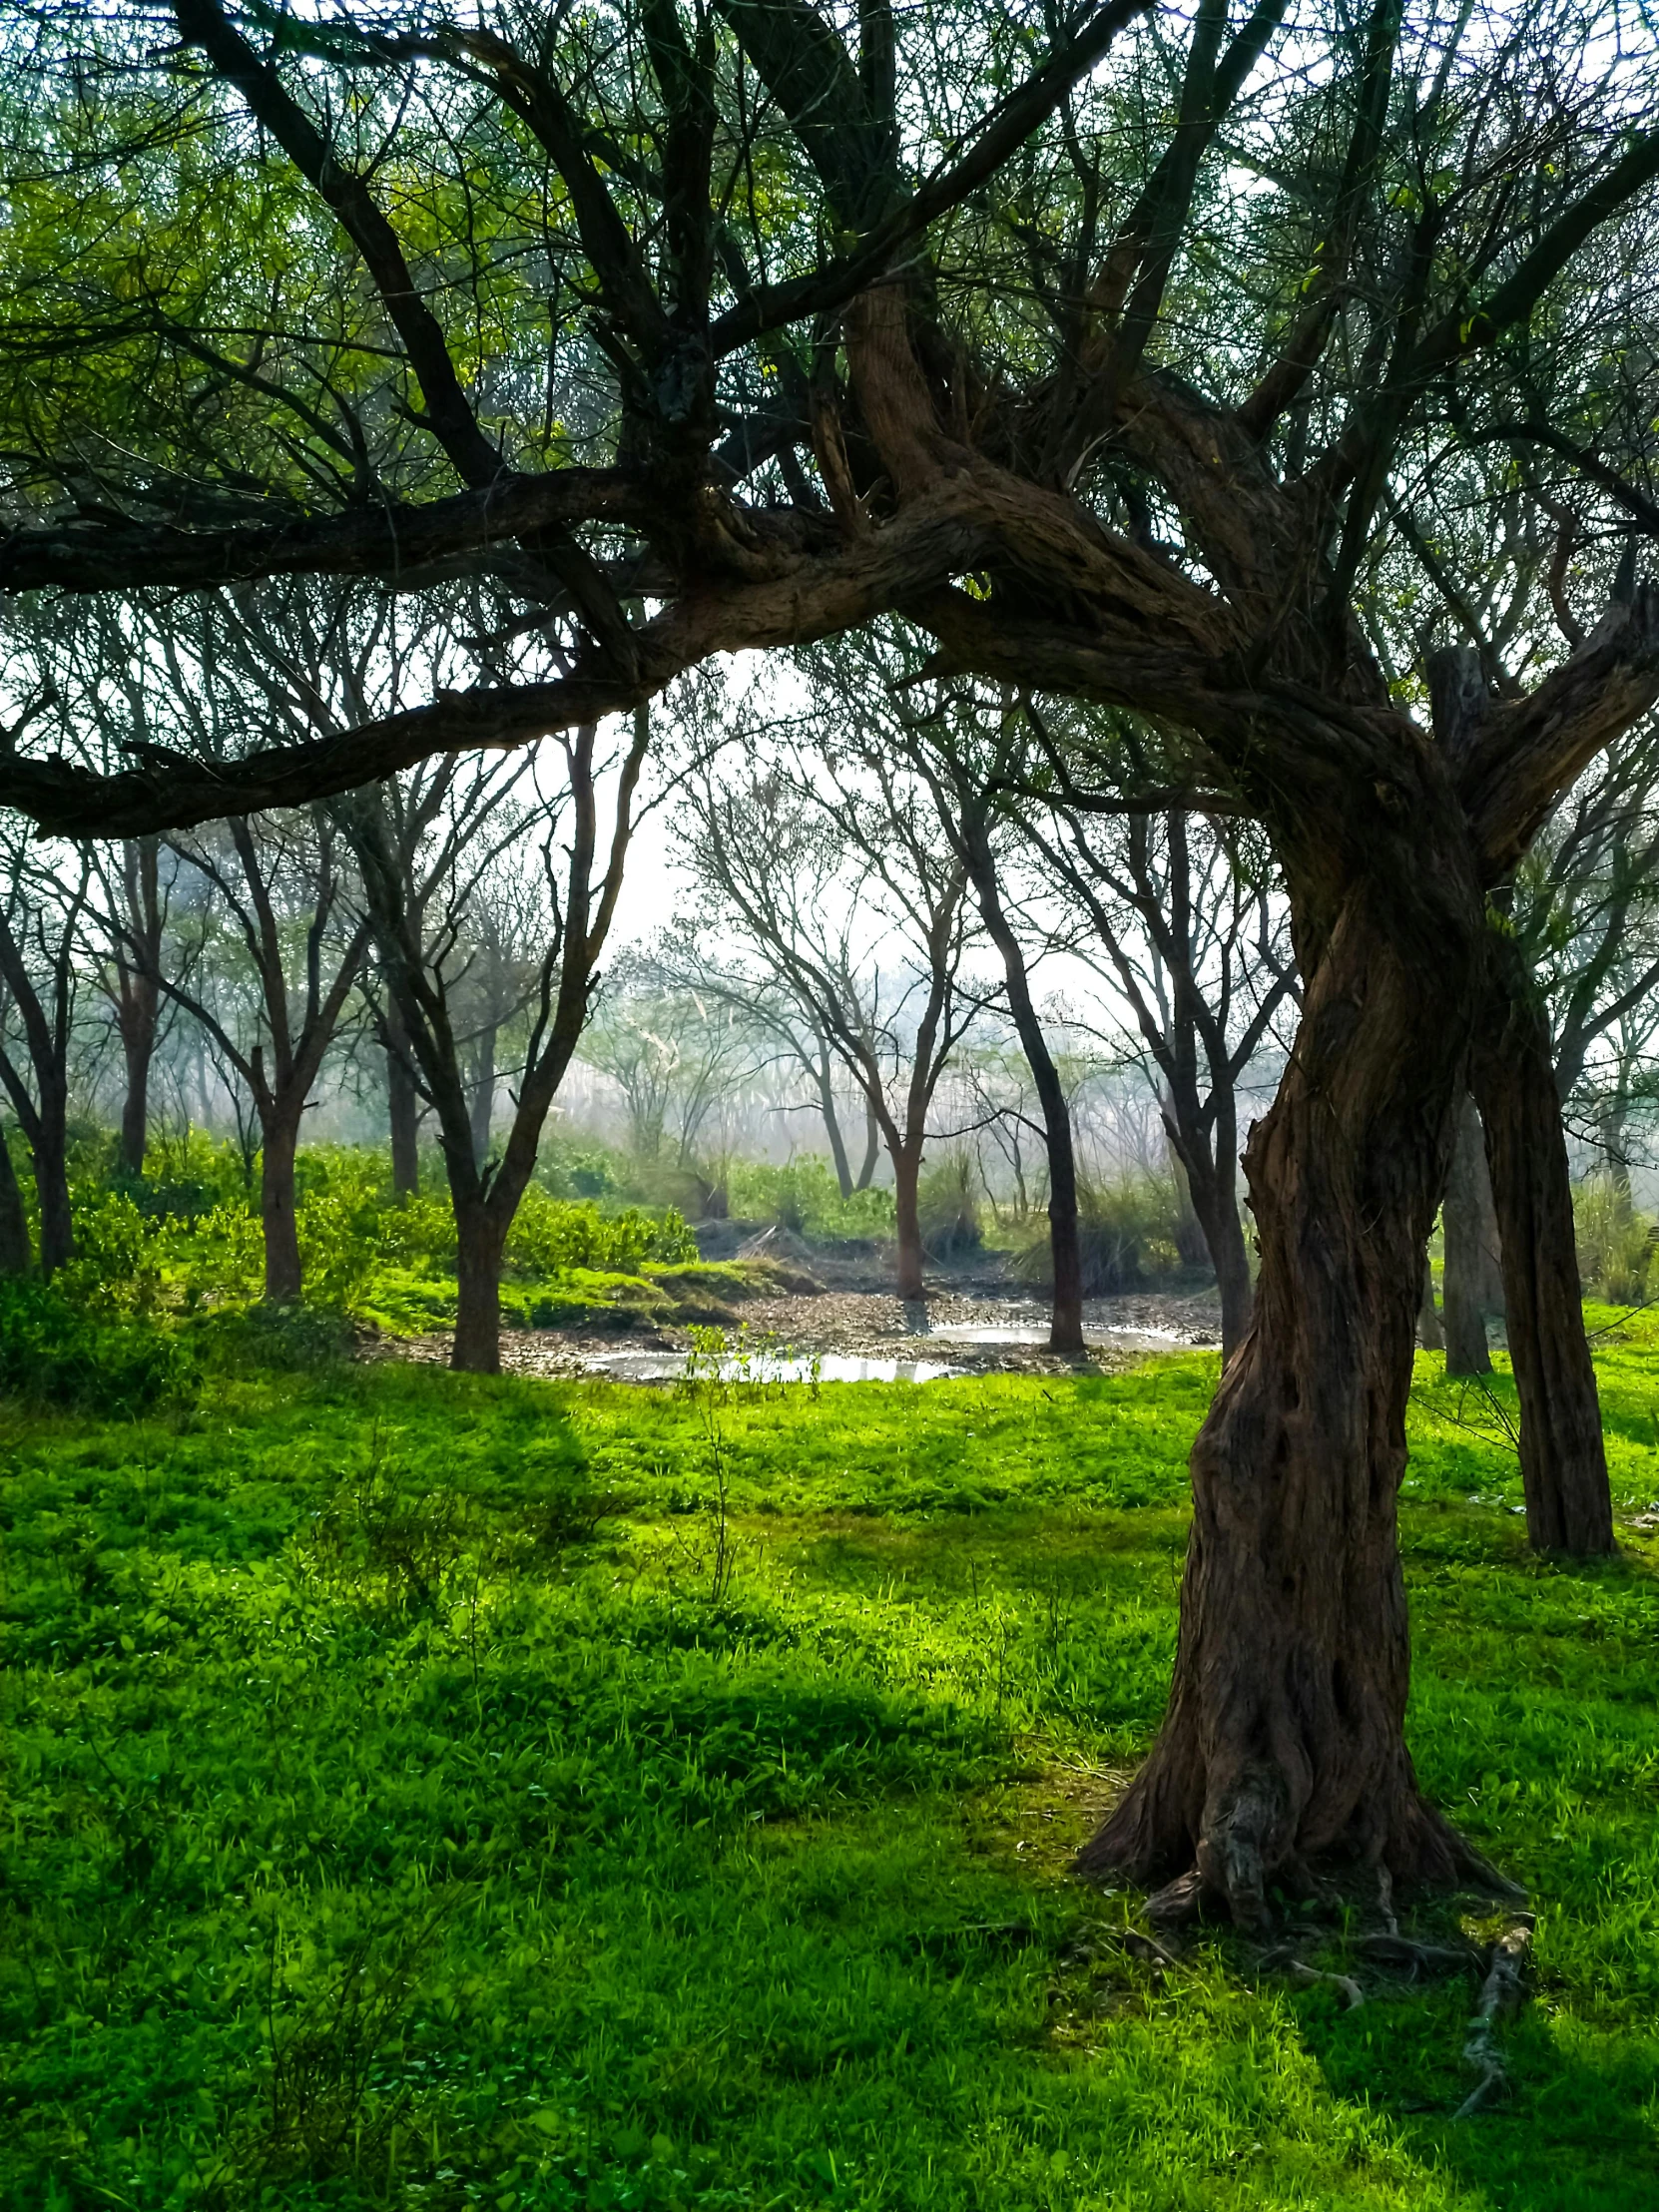 a herd of giraffe standing on top of a lush green field, inspired by Steve McCurry, pexels contest winner, land art, trees bent over river, panoramic shot, epic khajuraho, an old elven wood